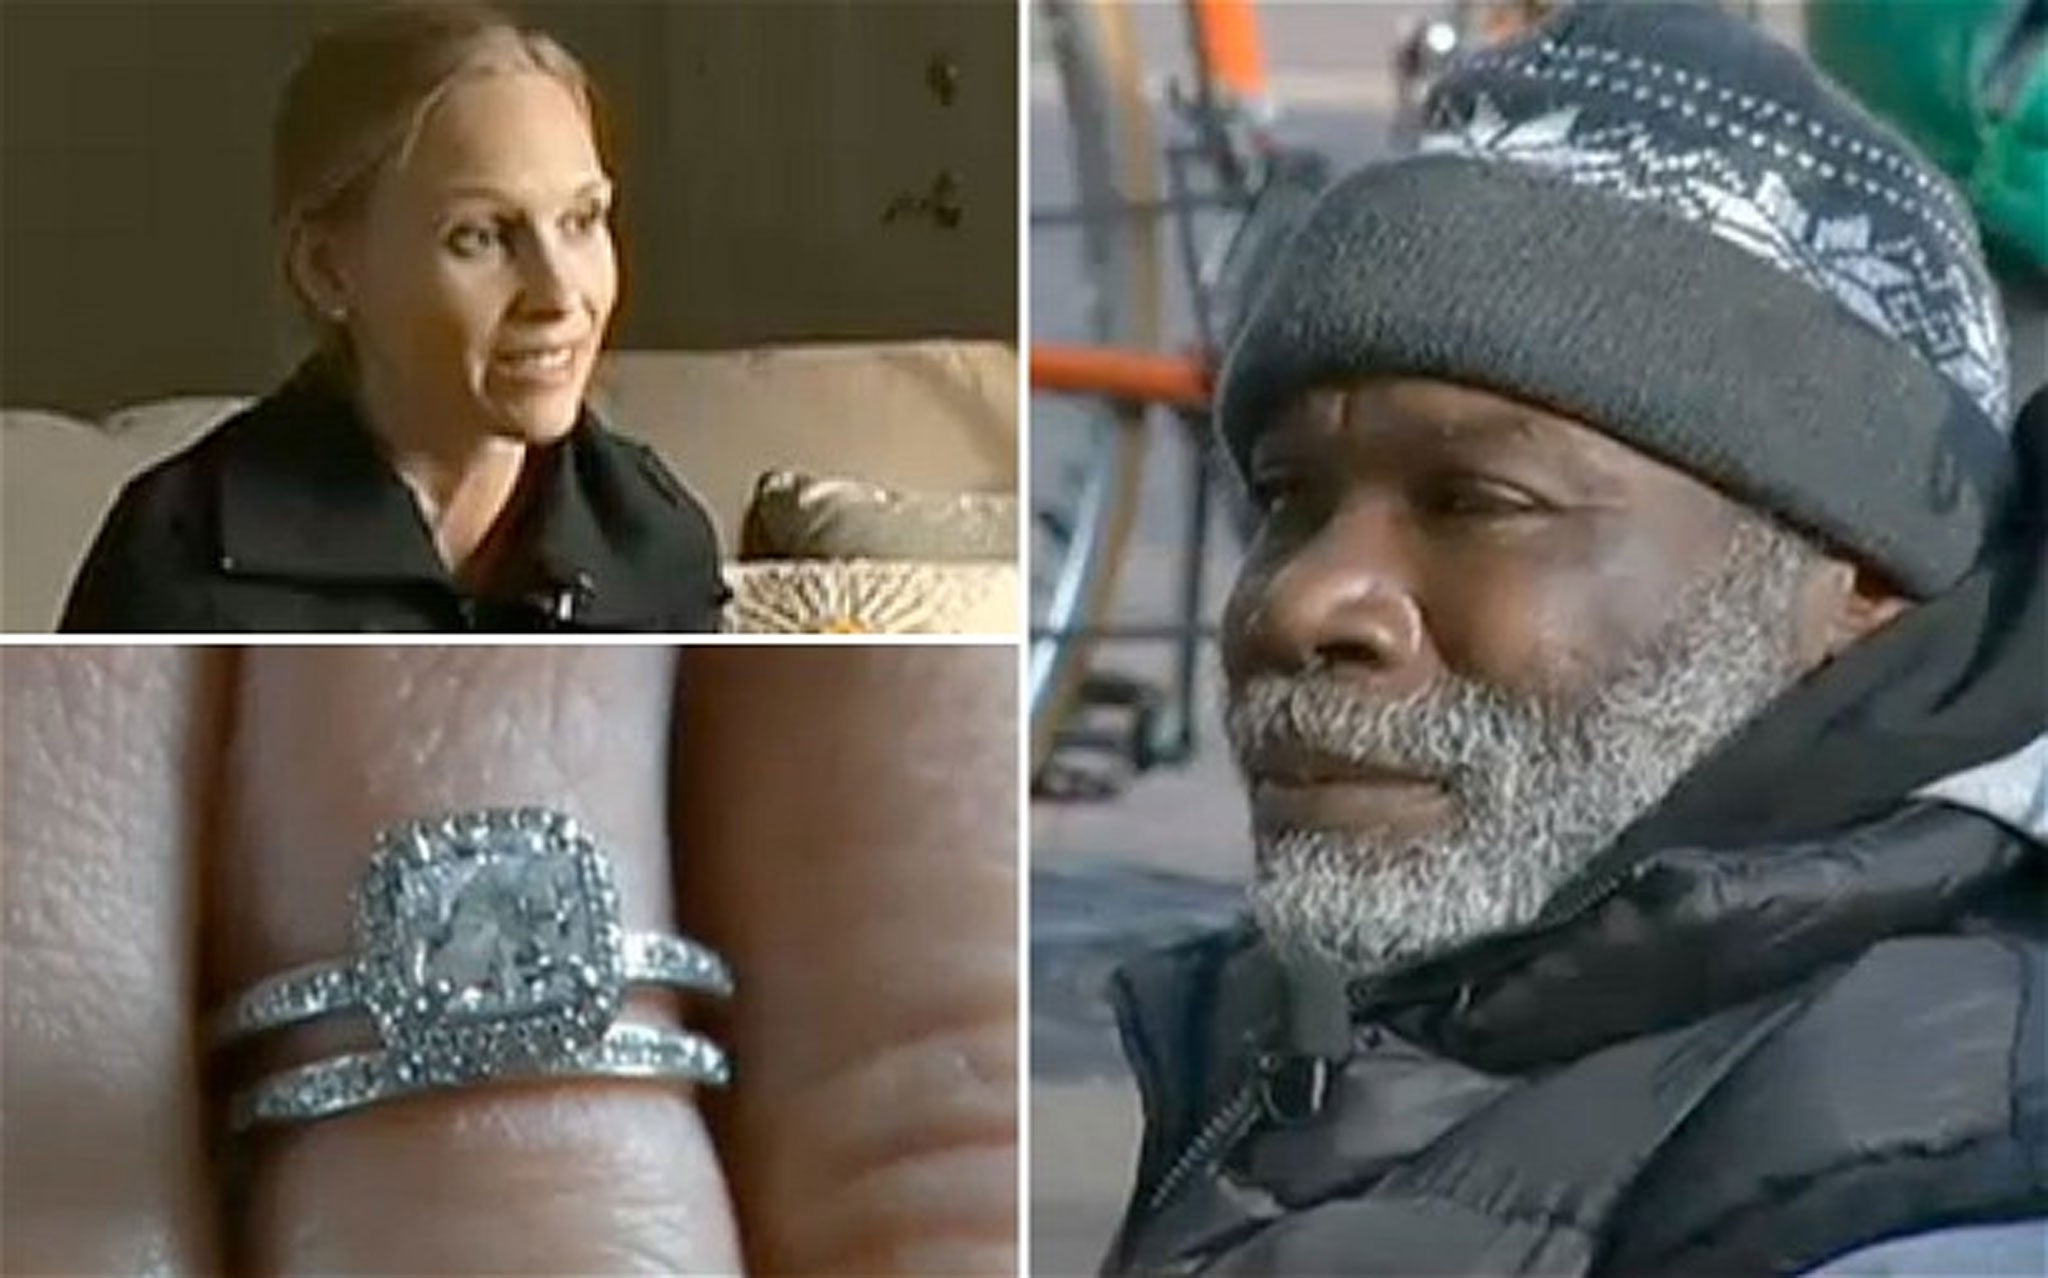 Sarah Darling lost her engagement ring, which was found and looked after by homeless bay Bill Ray Harris